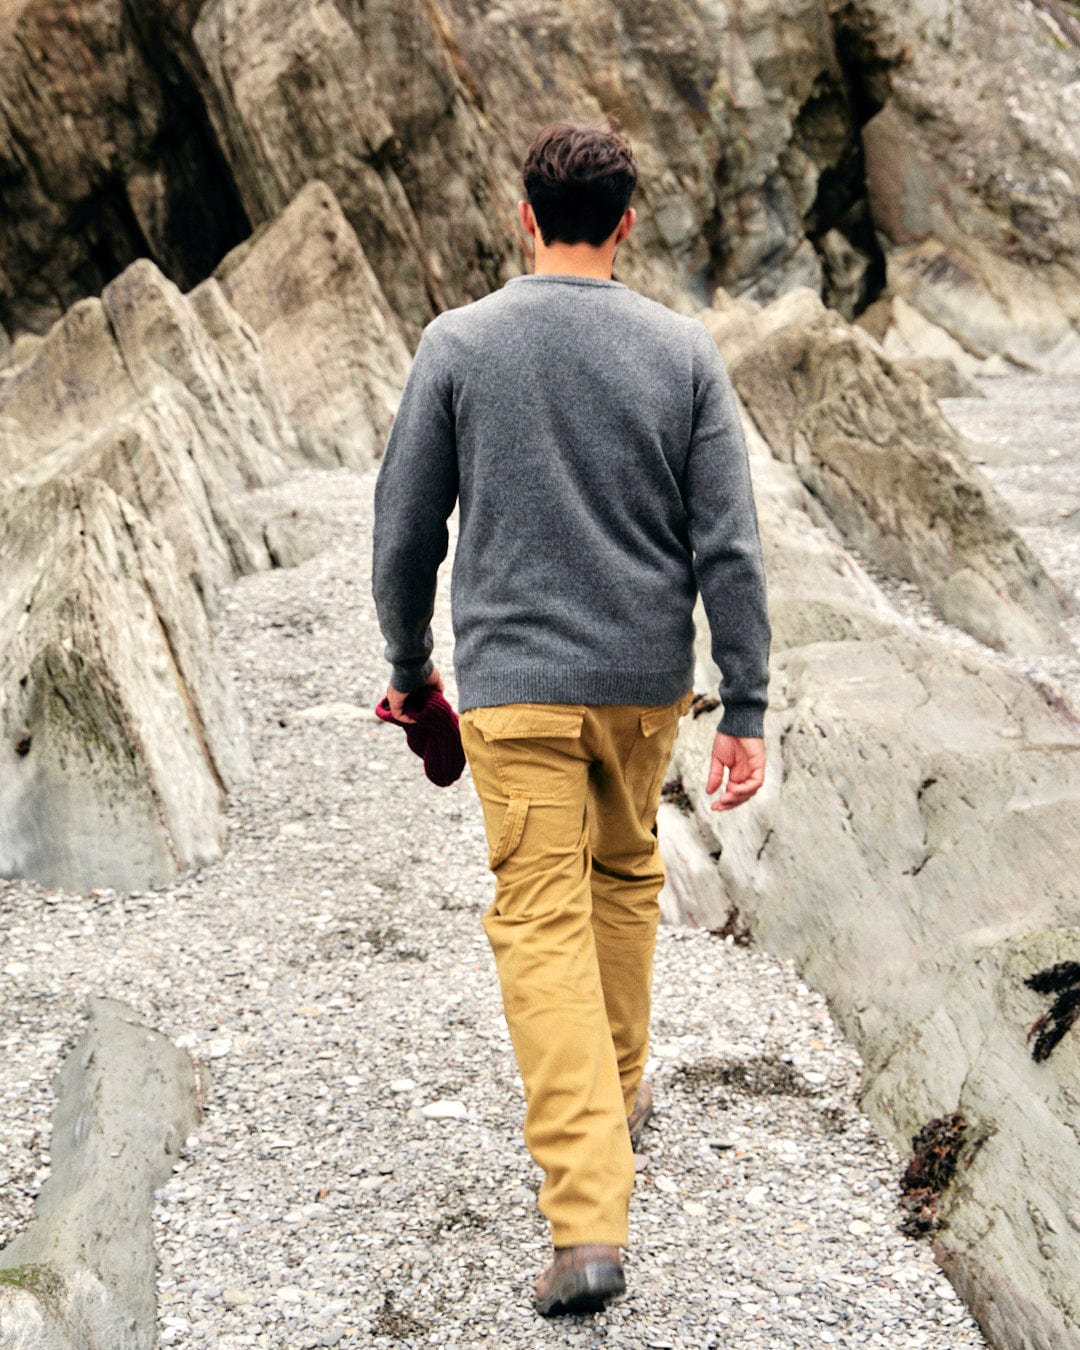 A man walking down a rocky path, carrying a bottle of water, showcasing the Saltrock branding on his clothing. He is dressed in the Saltrock Bowen - Mens Knitted Crew - Grey, perfect for layering during outdoor.